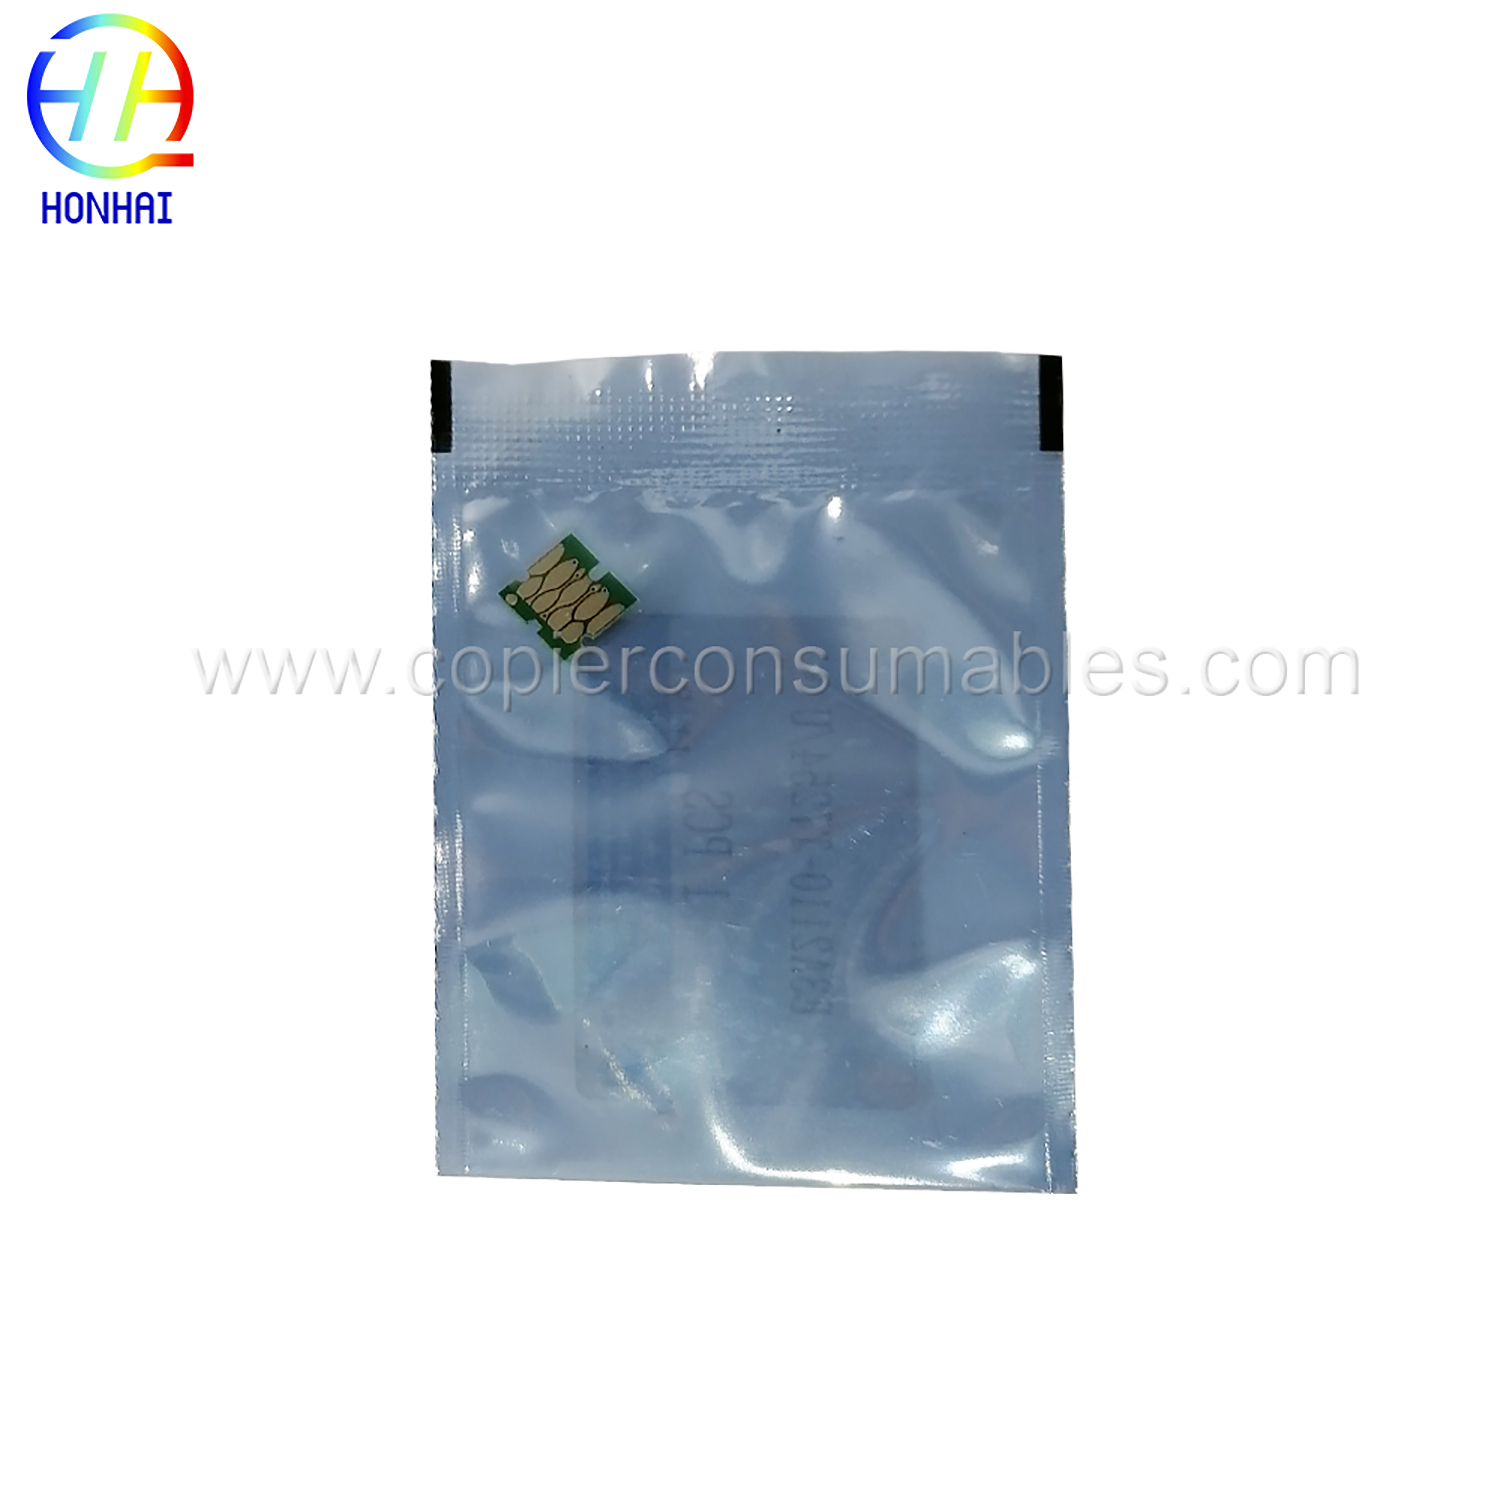 Refillalbe Ink Cartridge Chip For Epson F2000 F2100 F2130 (2) 拷贝